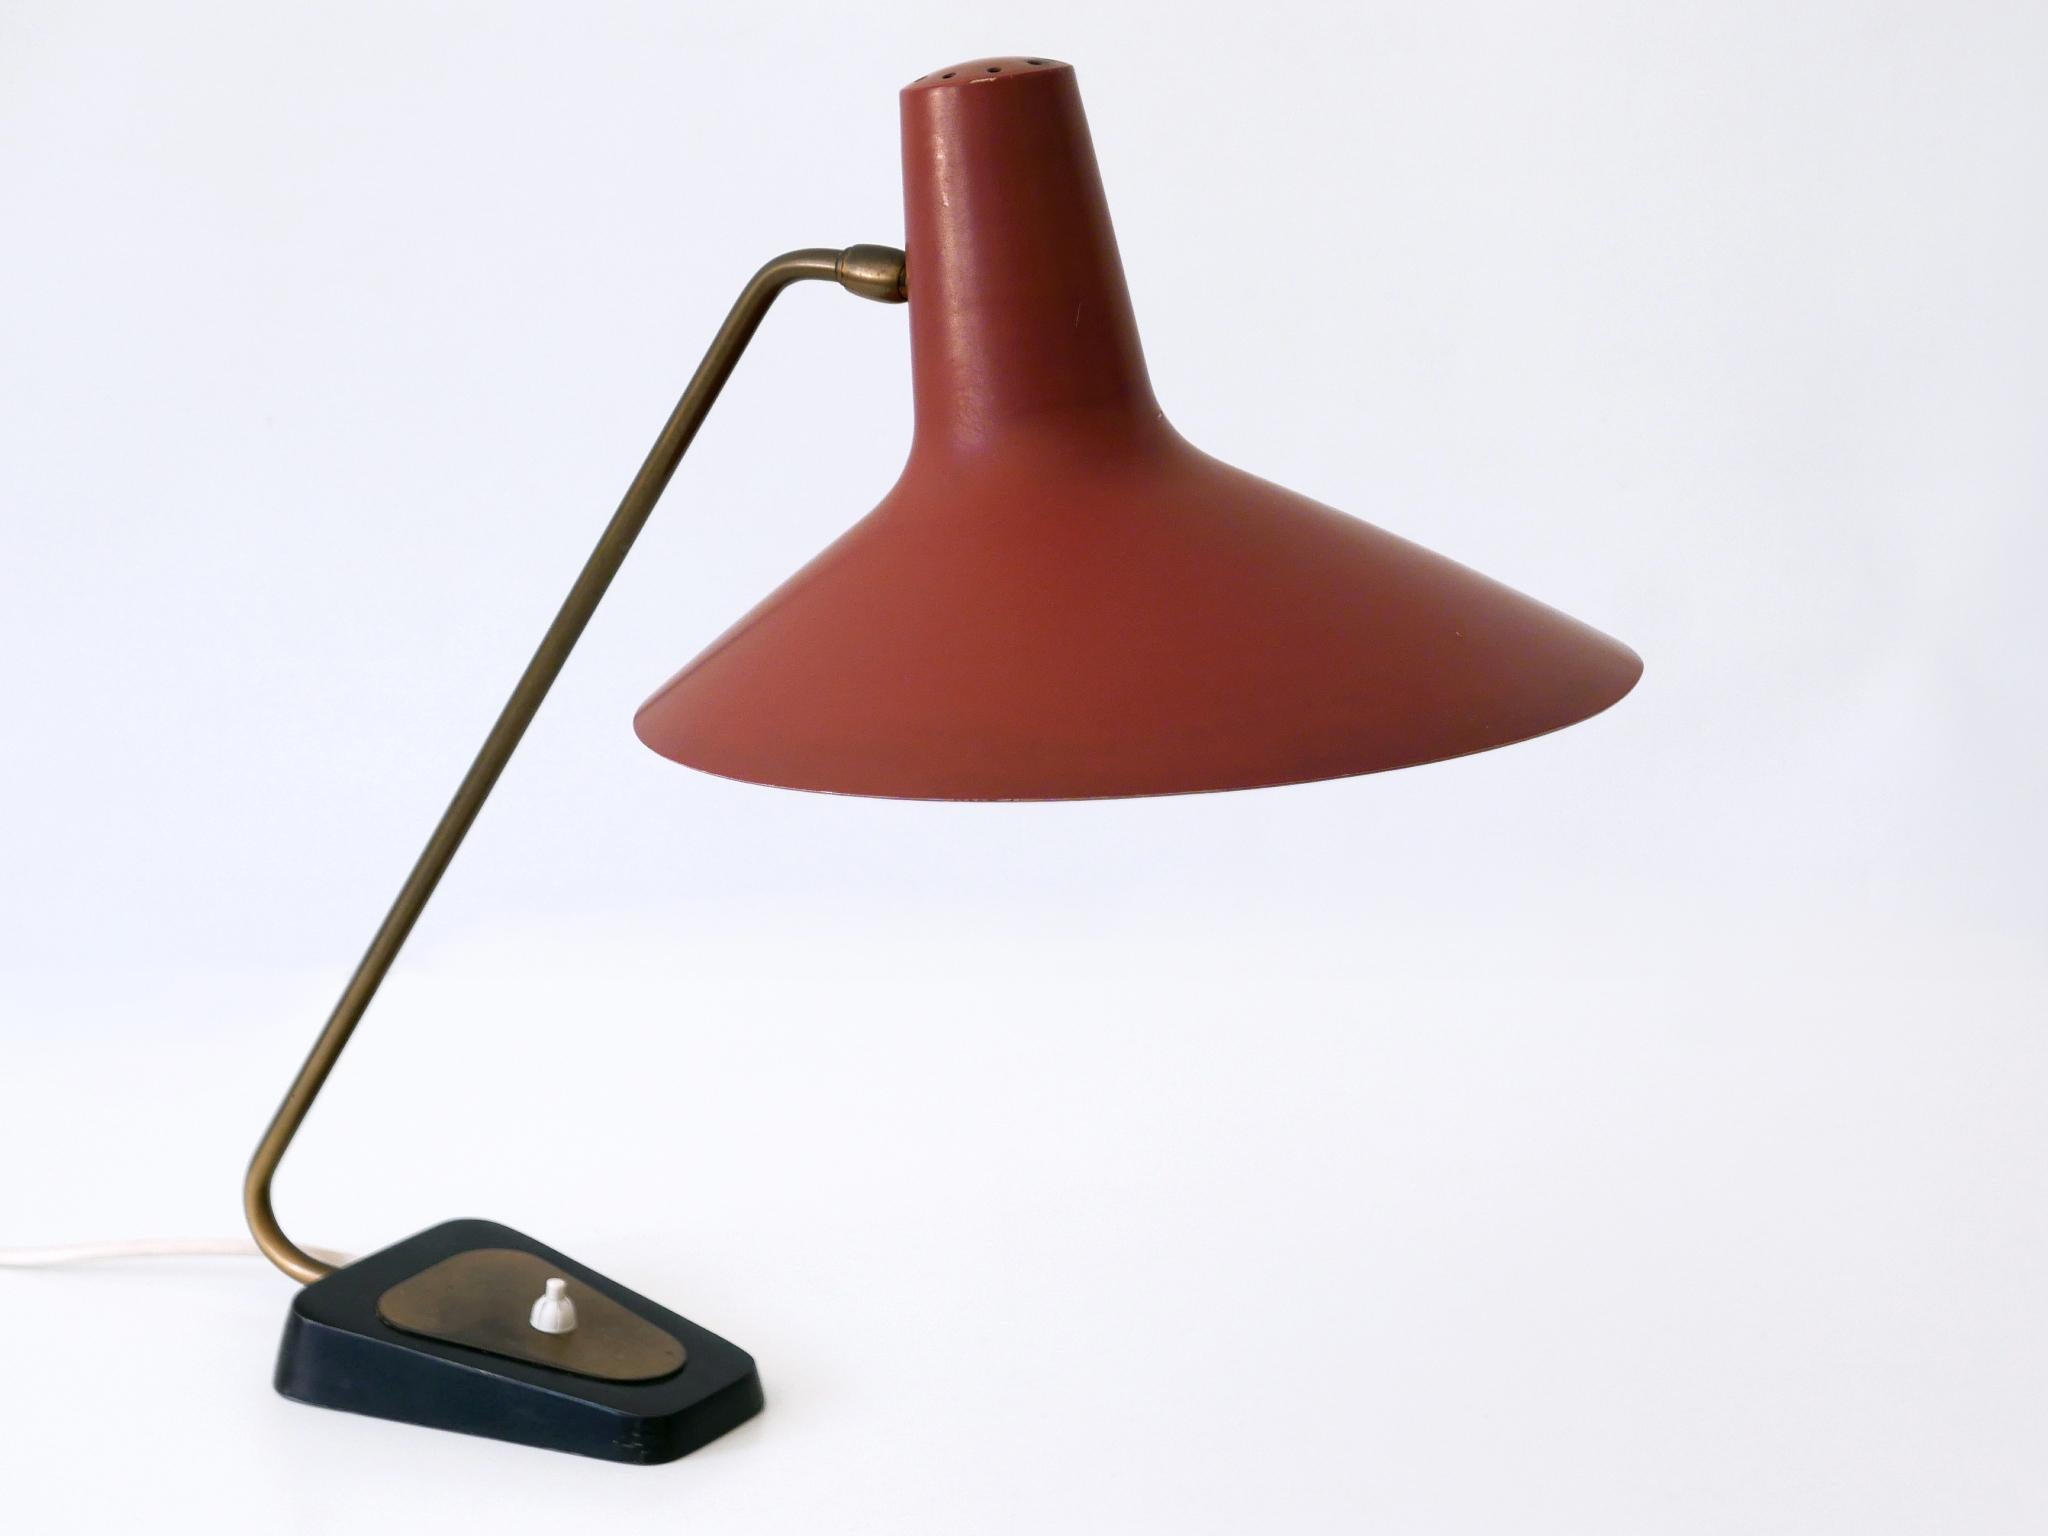 Exceptional Mid-Century Modern Table Lamp by Gebrüder Cosack Germany 1950s For Sale 3